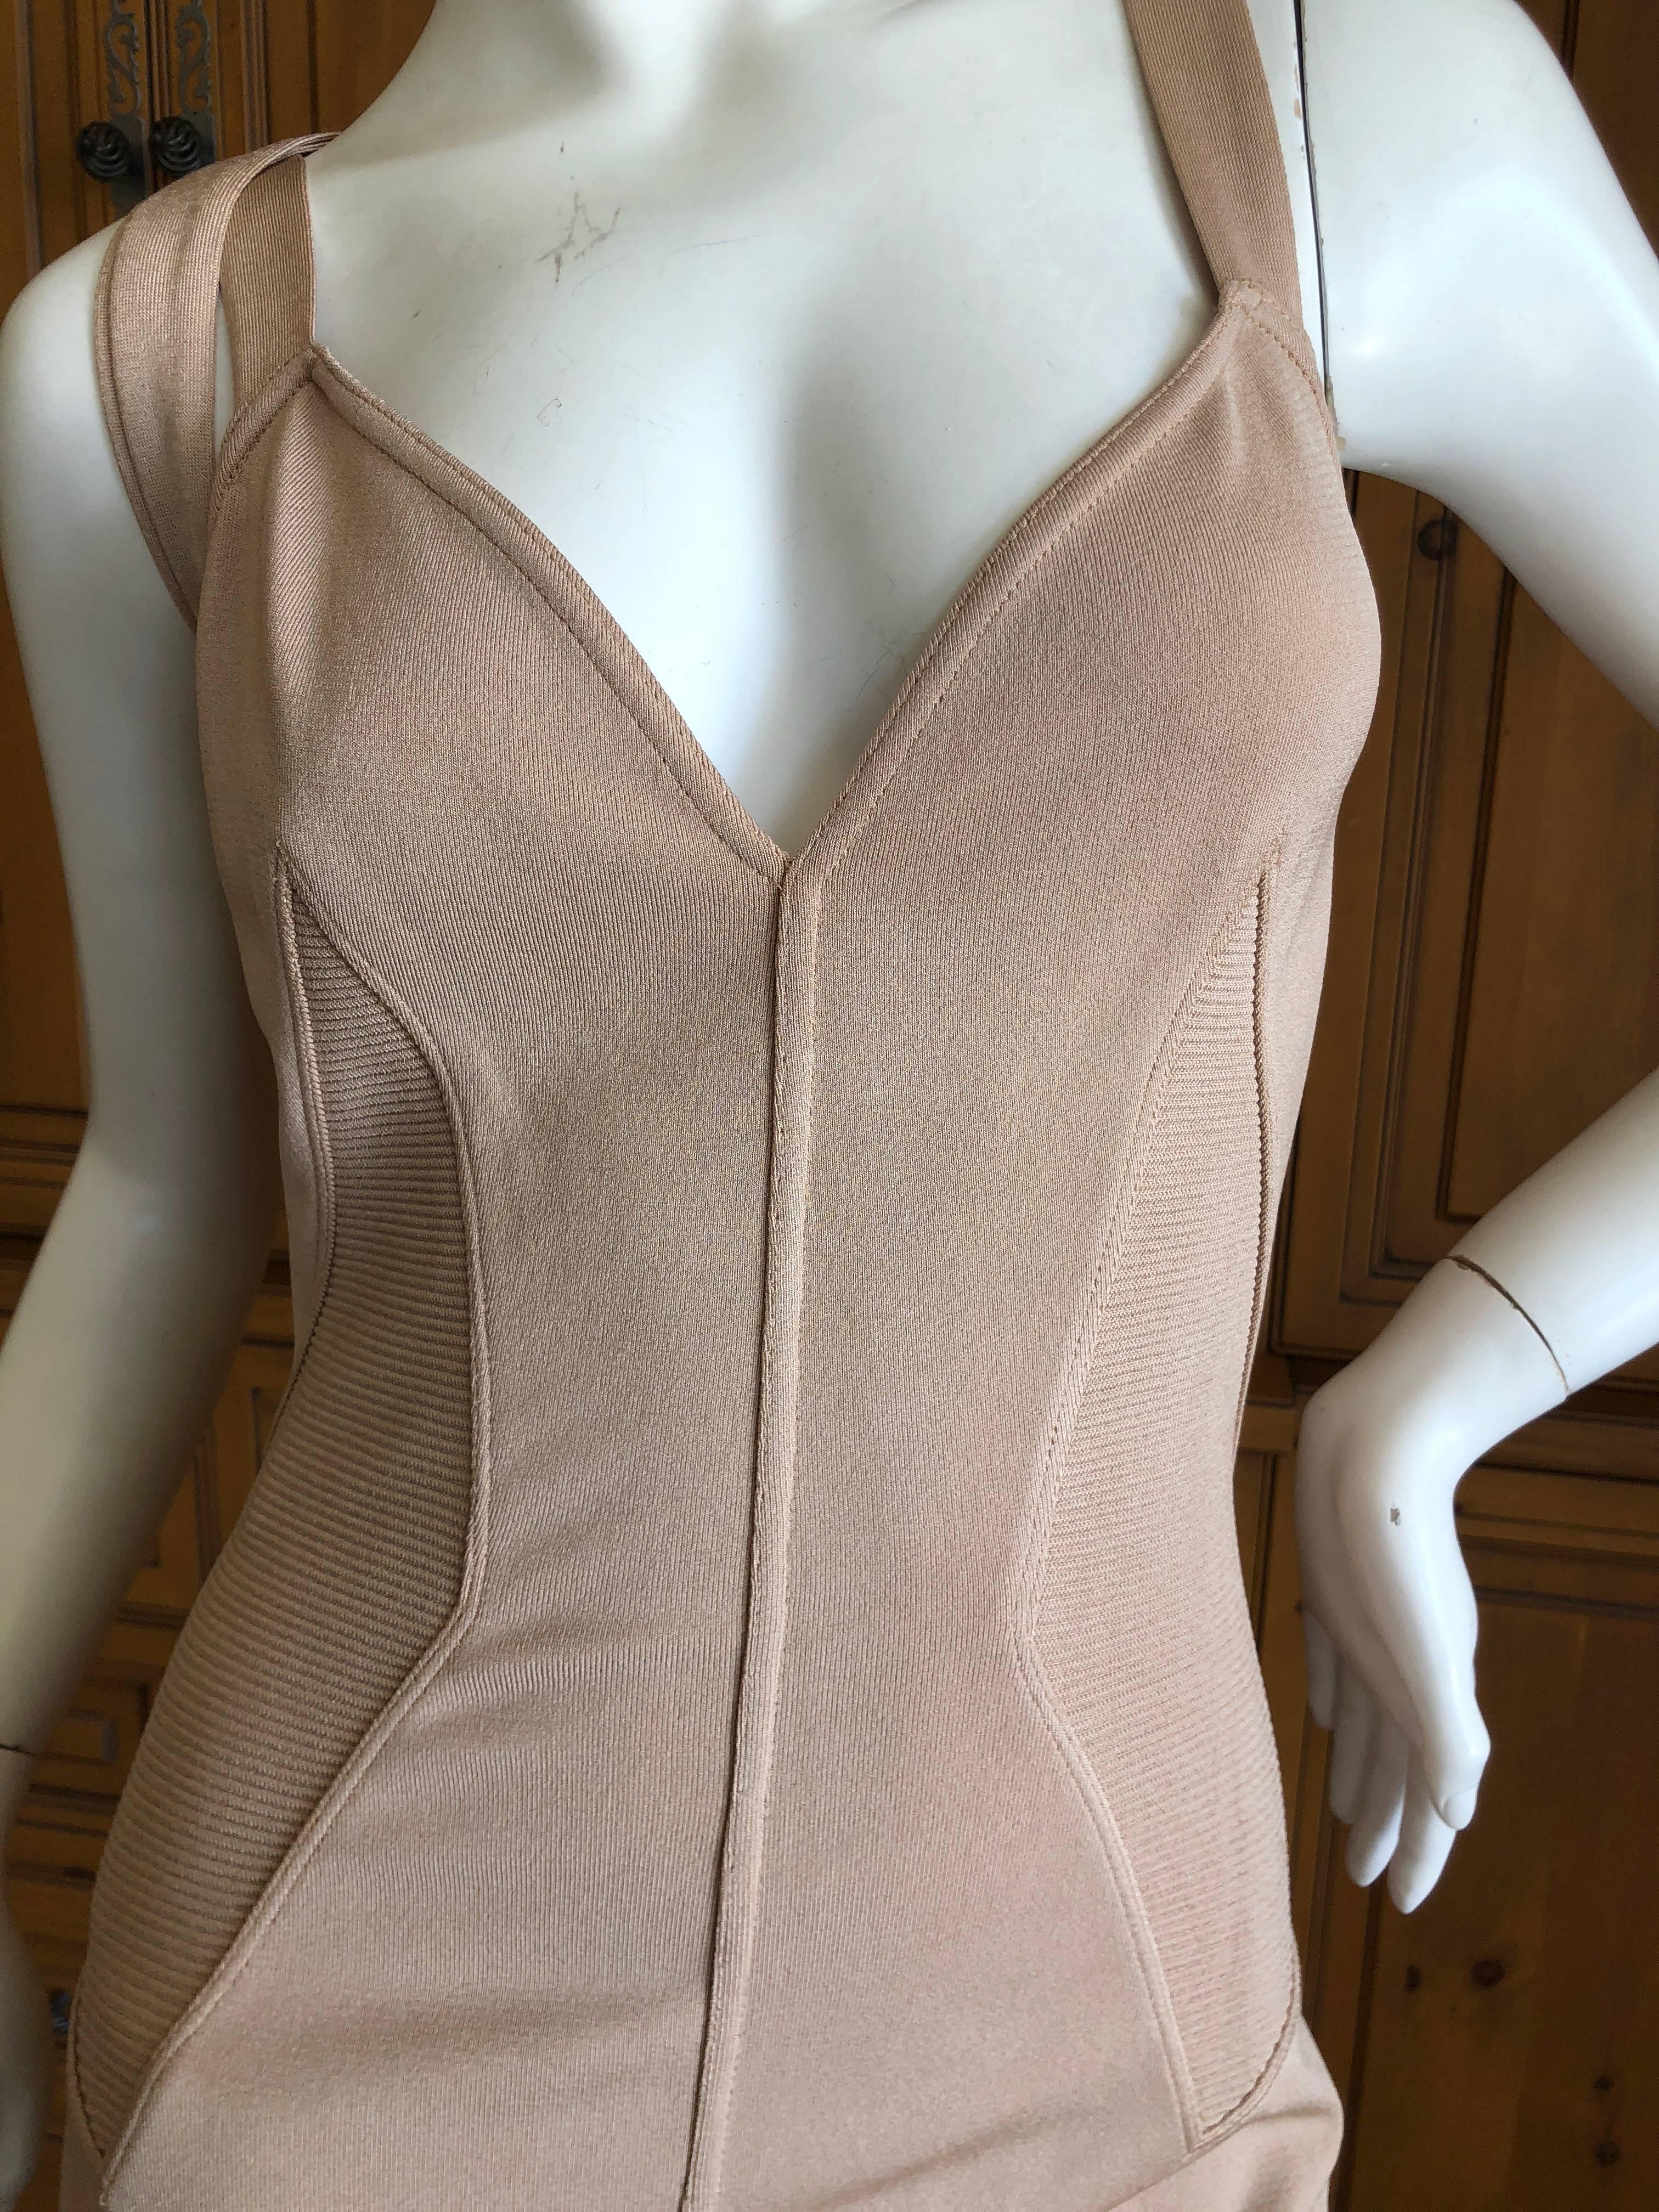 Azzedine Alaia  Vintage 1980's Tan Cross Back  Dress with  Inserts New with Tags For Sale 2